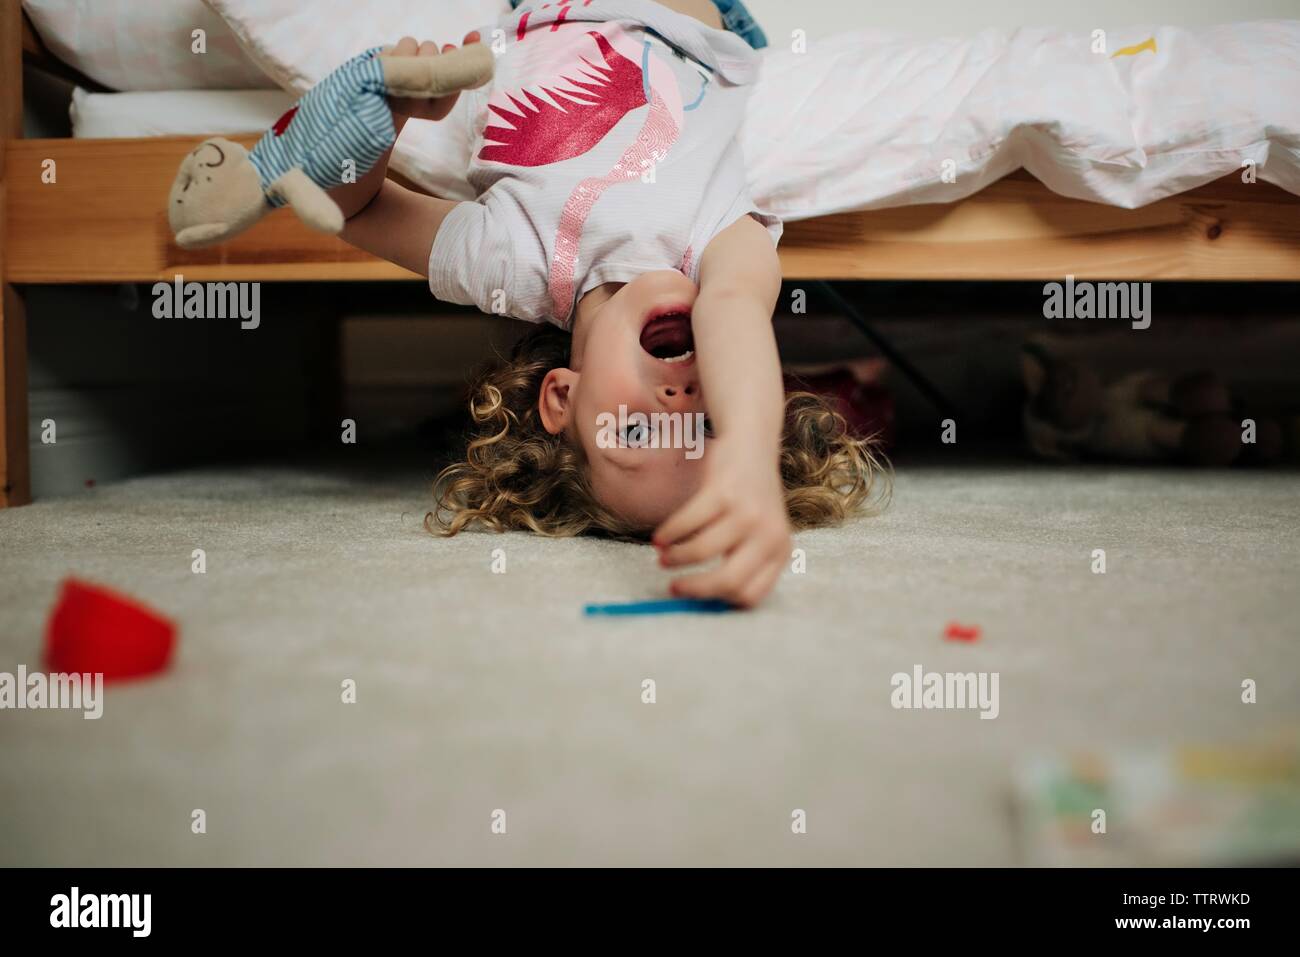 young blonde girl hanging upside down on bed smiling with soft toy Stock Photo